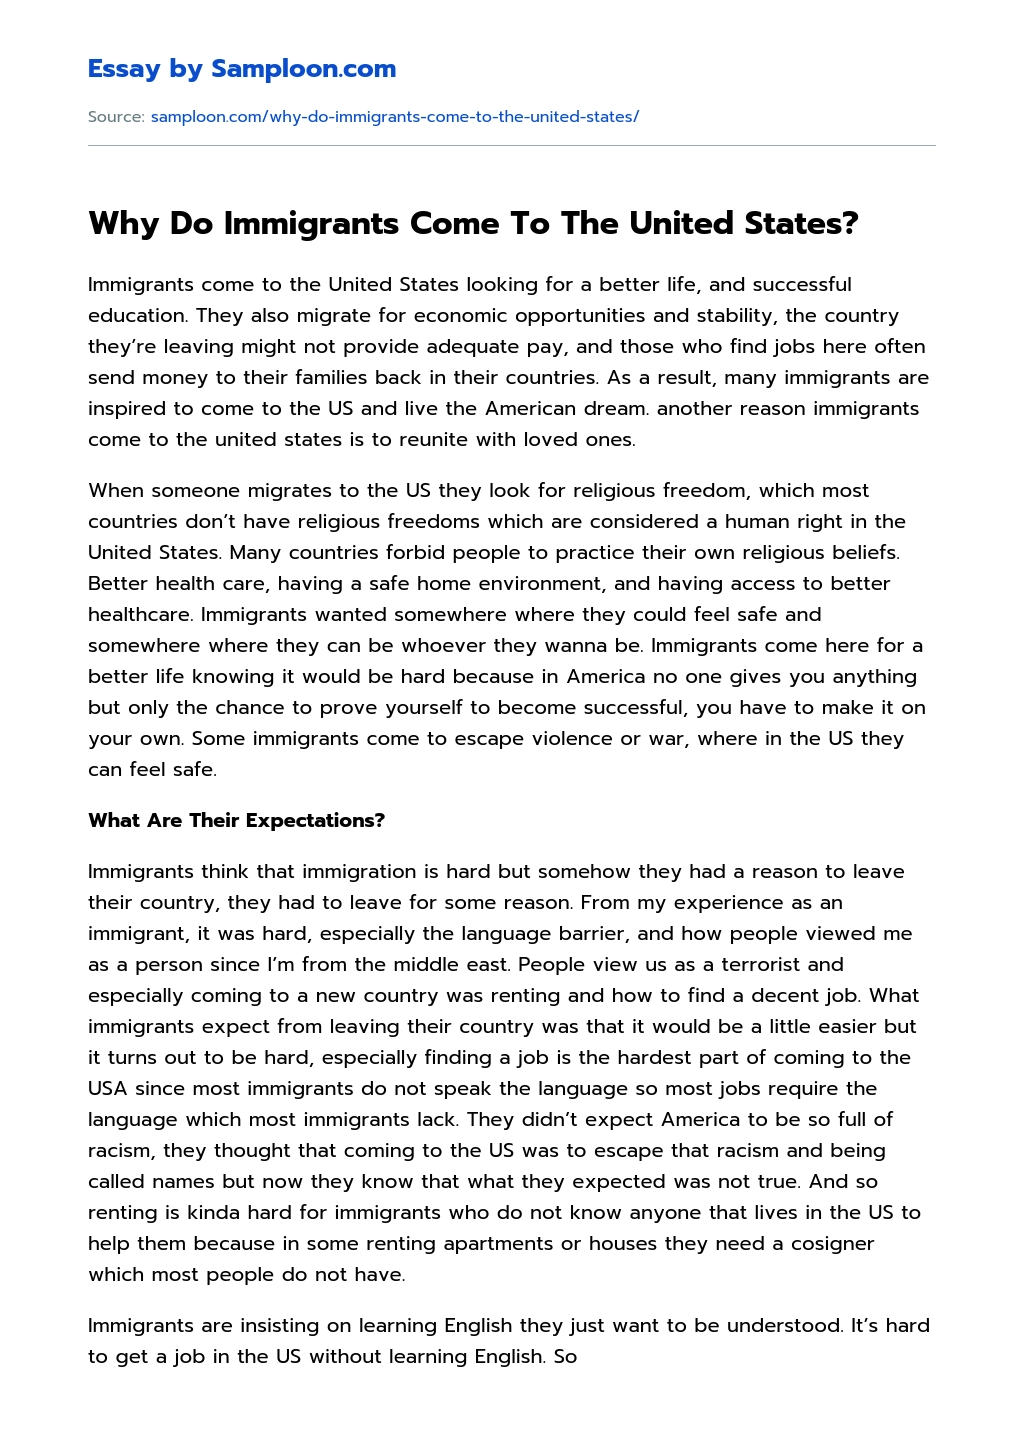 Why Do Immigrants Come To The United States? essay